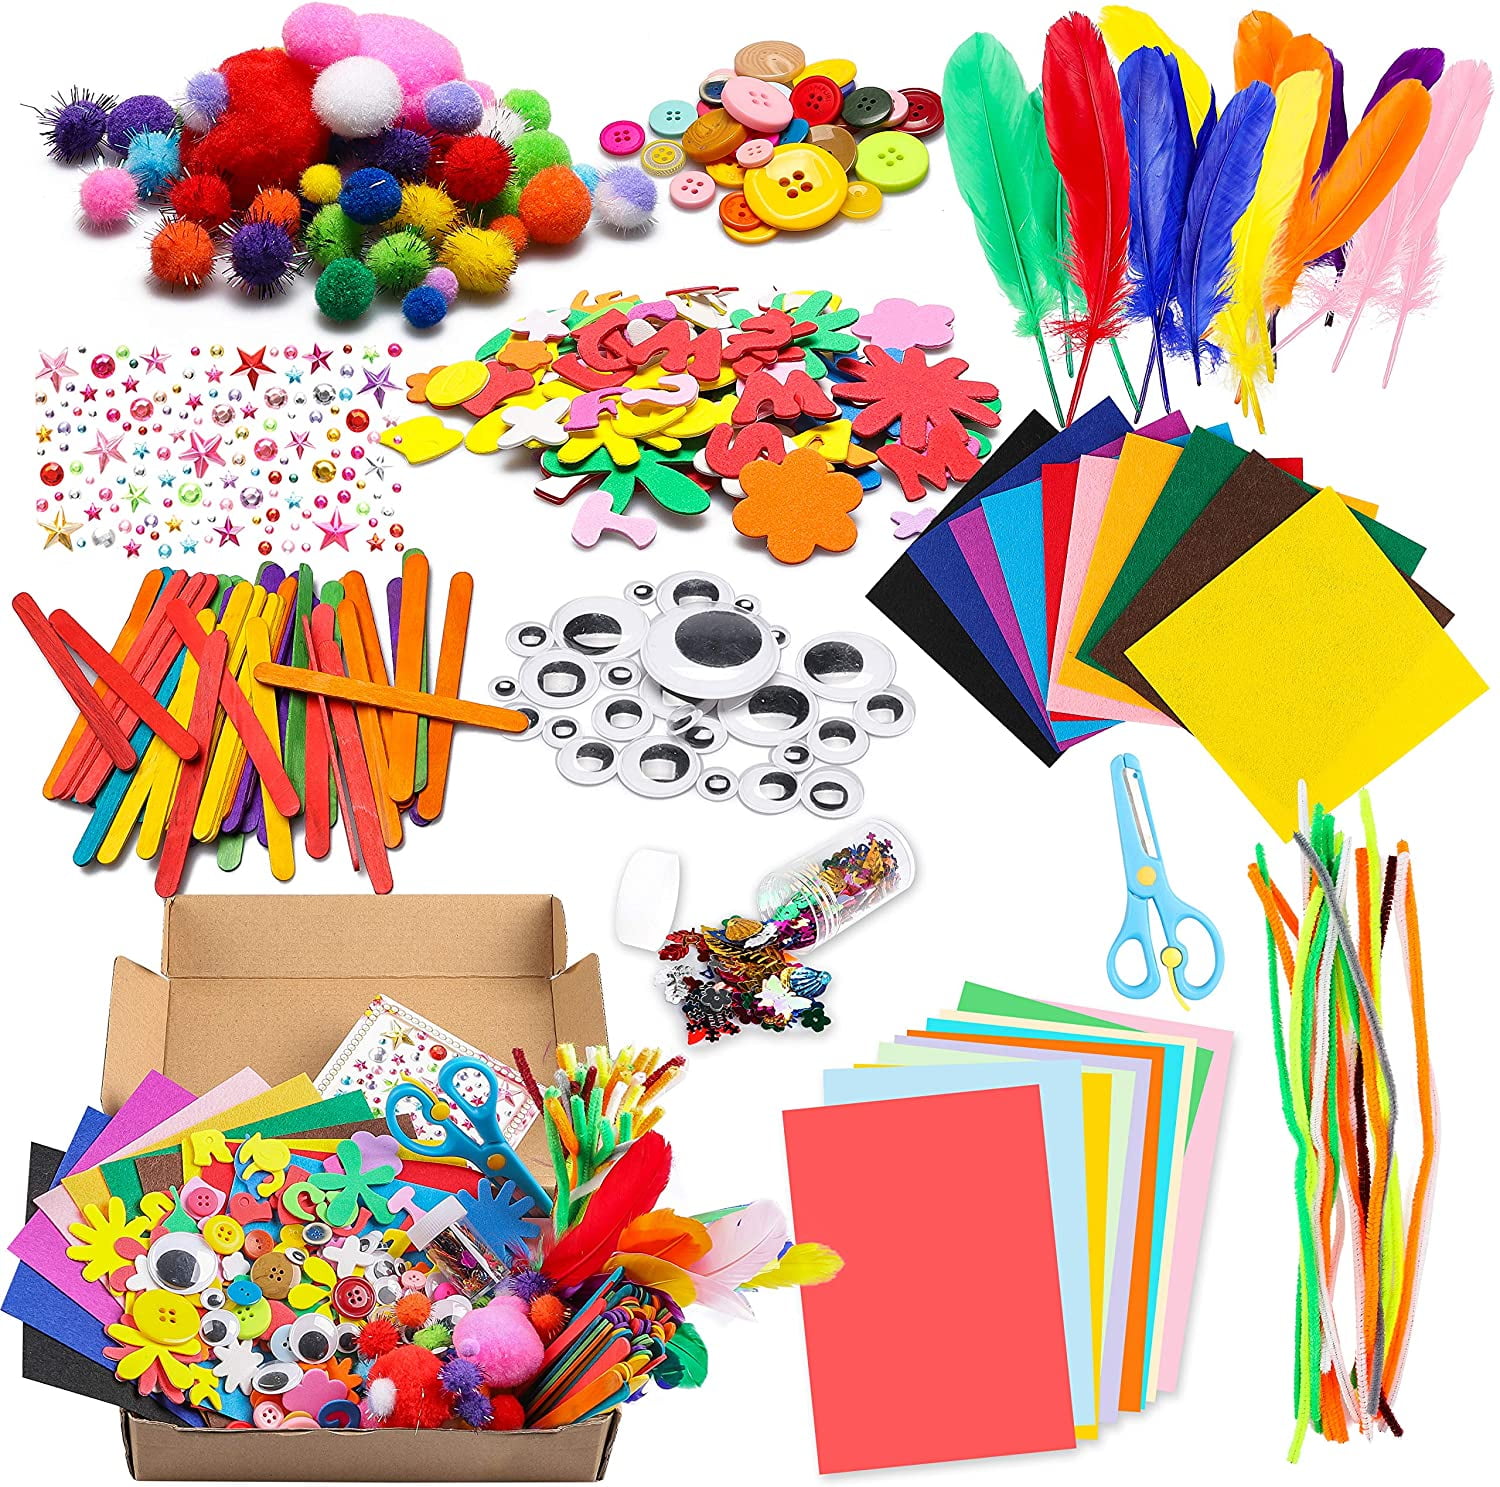 Ottoy 1000pcs Art Craft Kit For Kids Creative Pompoms Pipe Cleaners